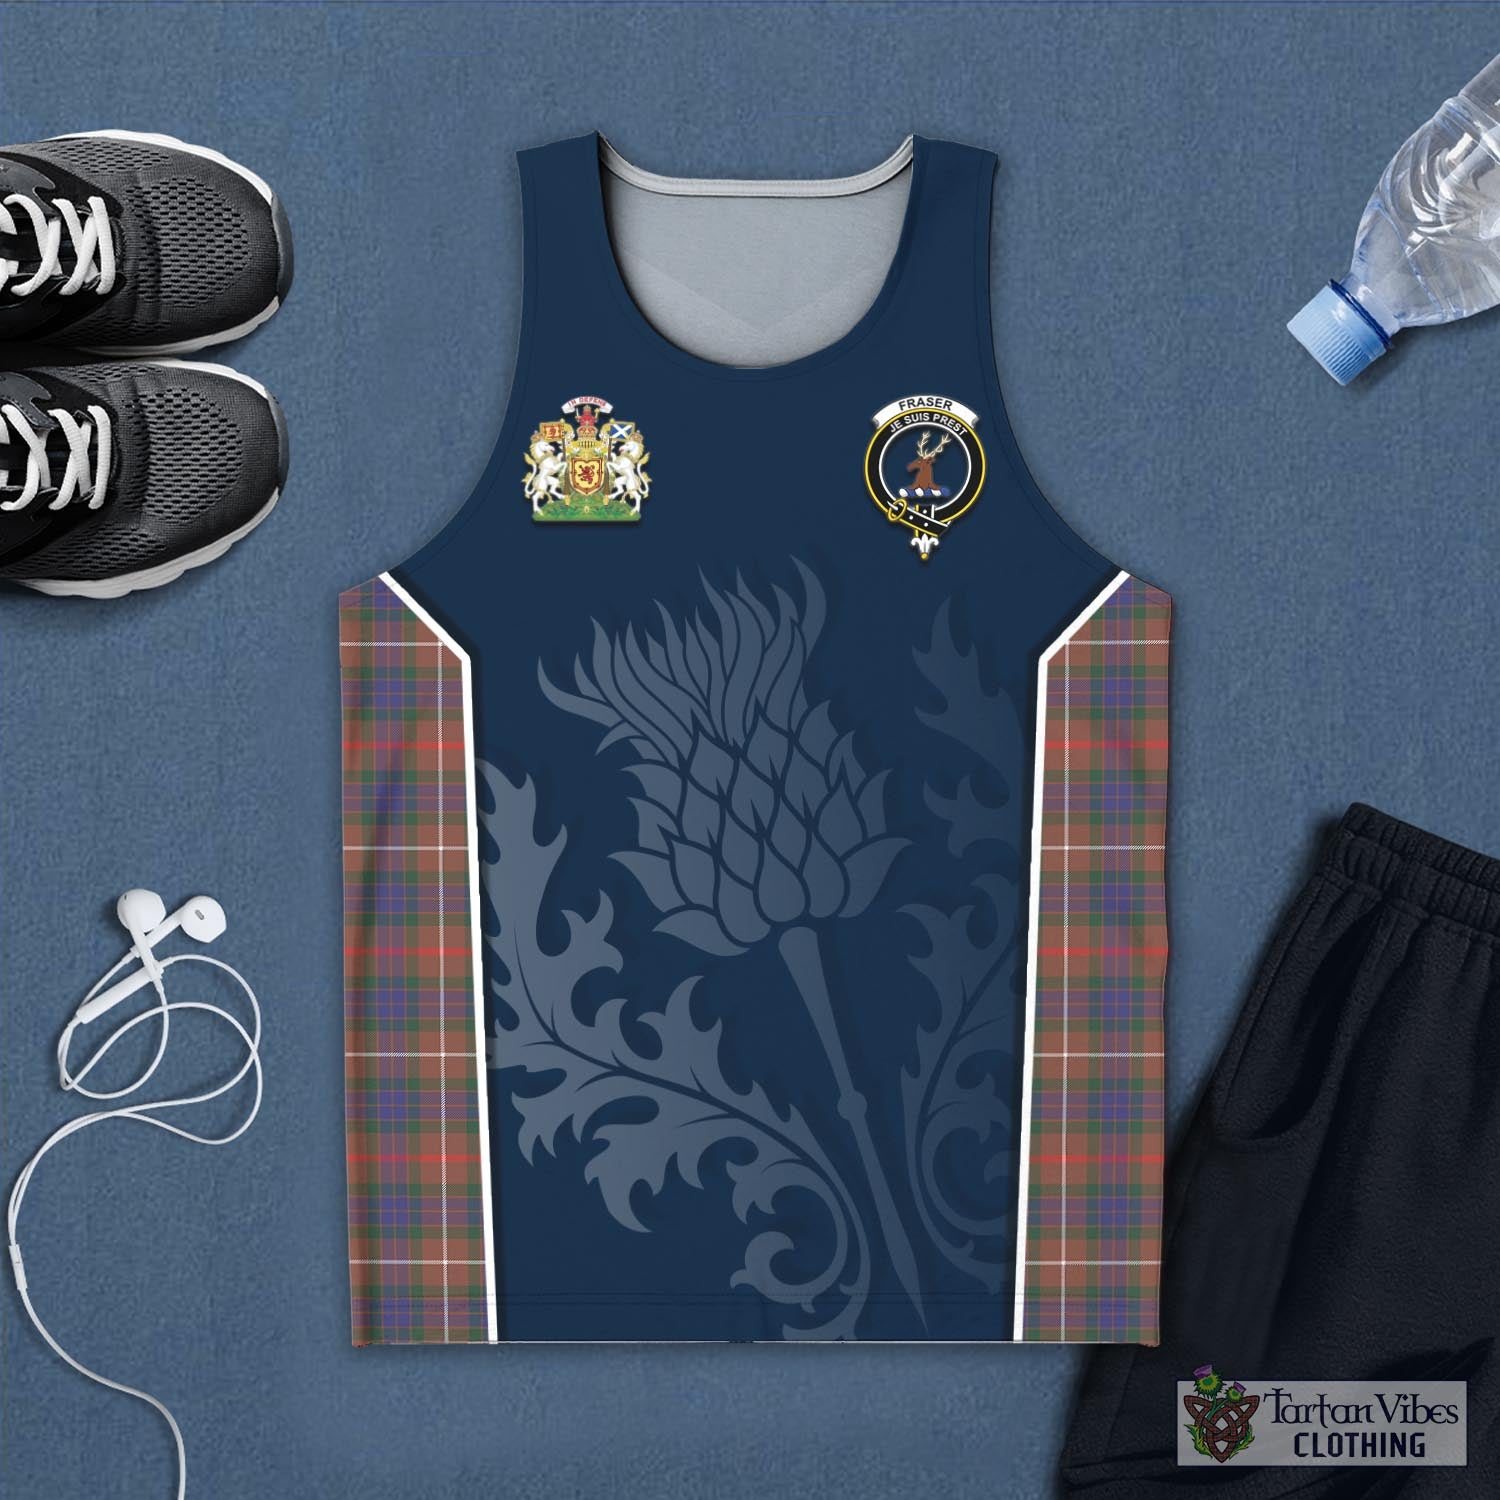 Tartan Vibes Clothing Fraser Hunting Modern Tartan Men's Tanks Top with Family Crest and Scottish Thistle Vibes Sport Style